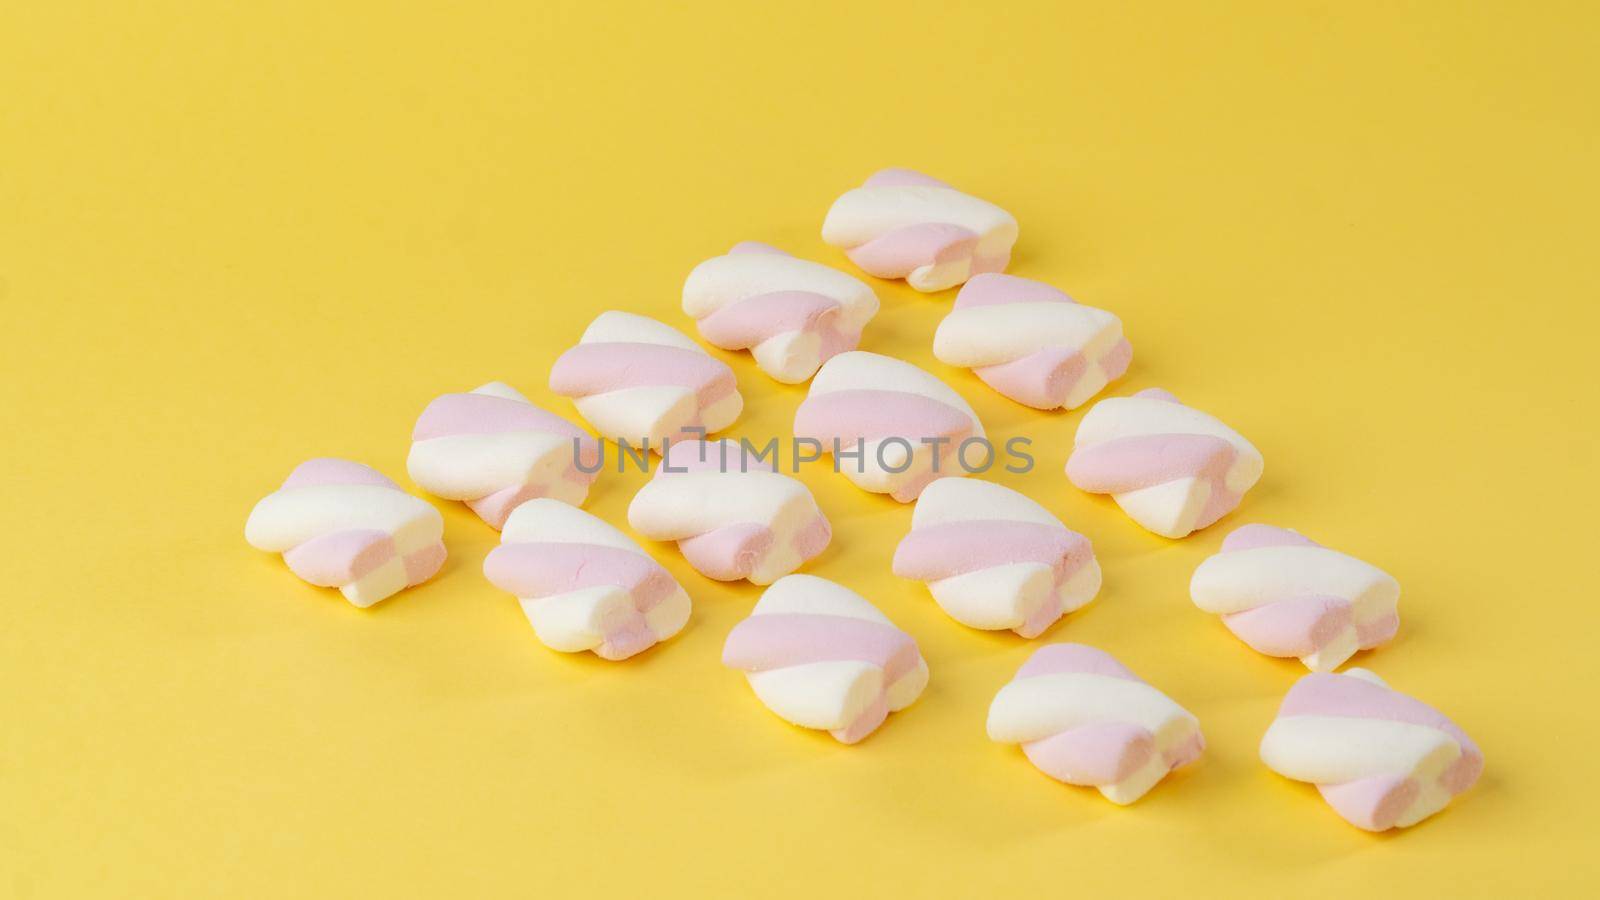 Background of marshmallow pigtails on a yellow background by voktybre